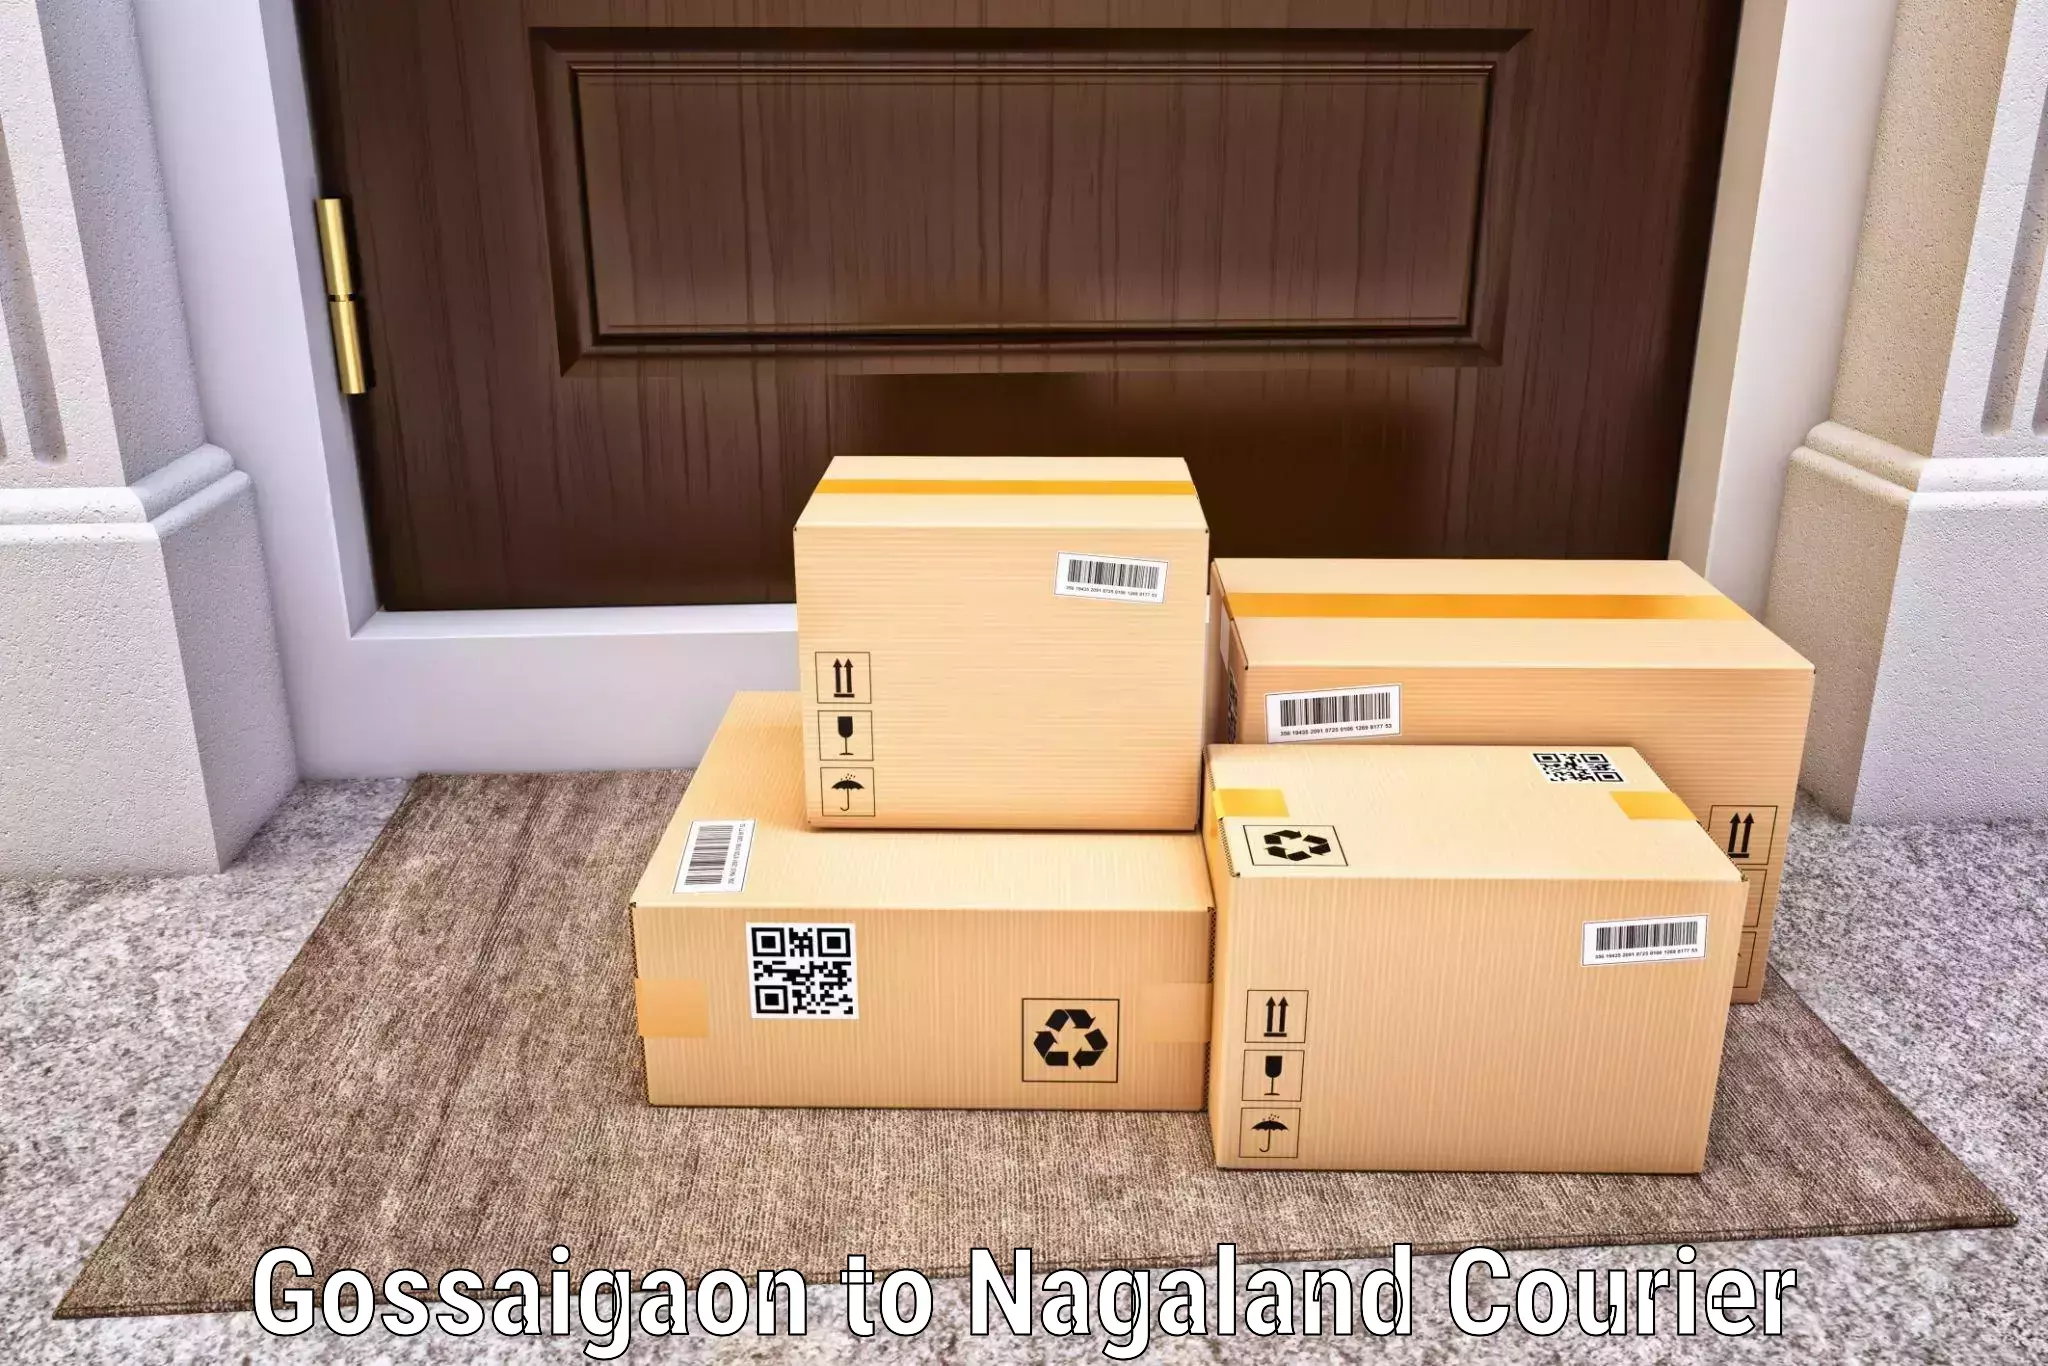 User-friendly courier app Gossaigaon to Mon